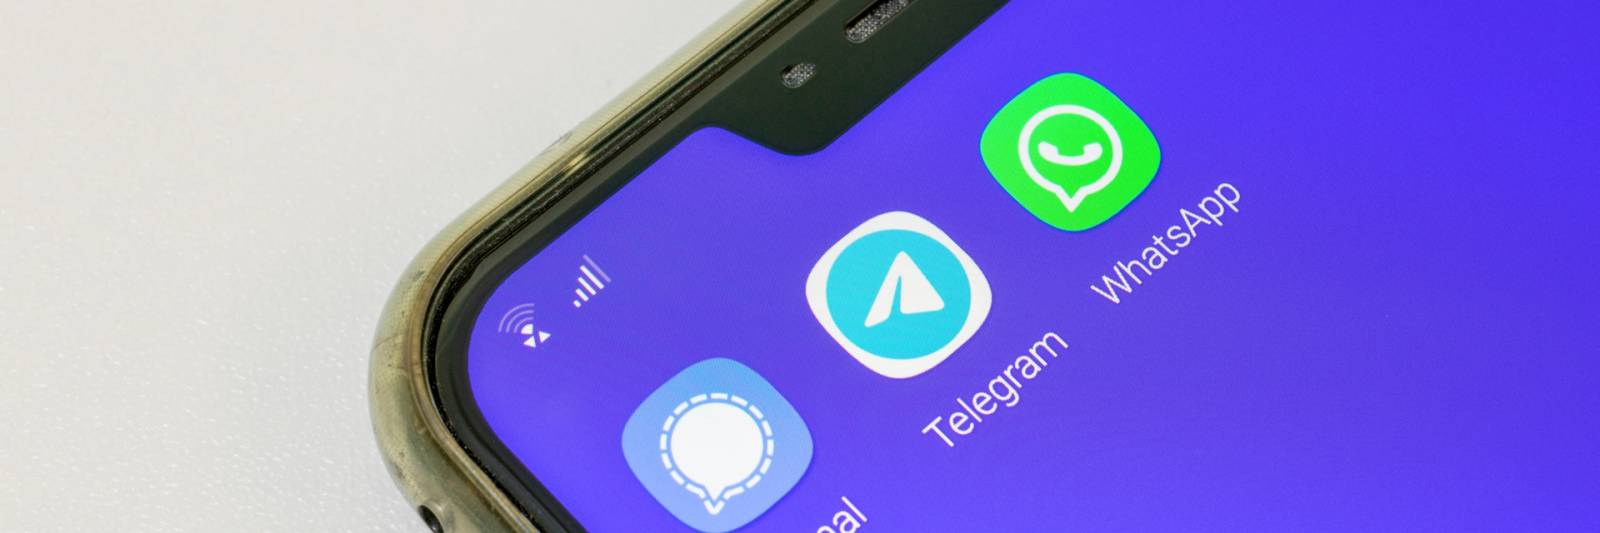 Whatsapp Presses Ahead With Privacy Changes Despite Backlash